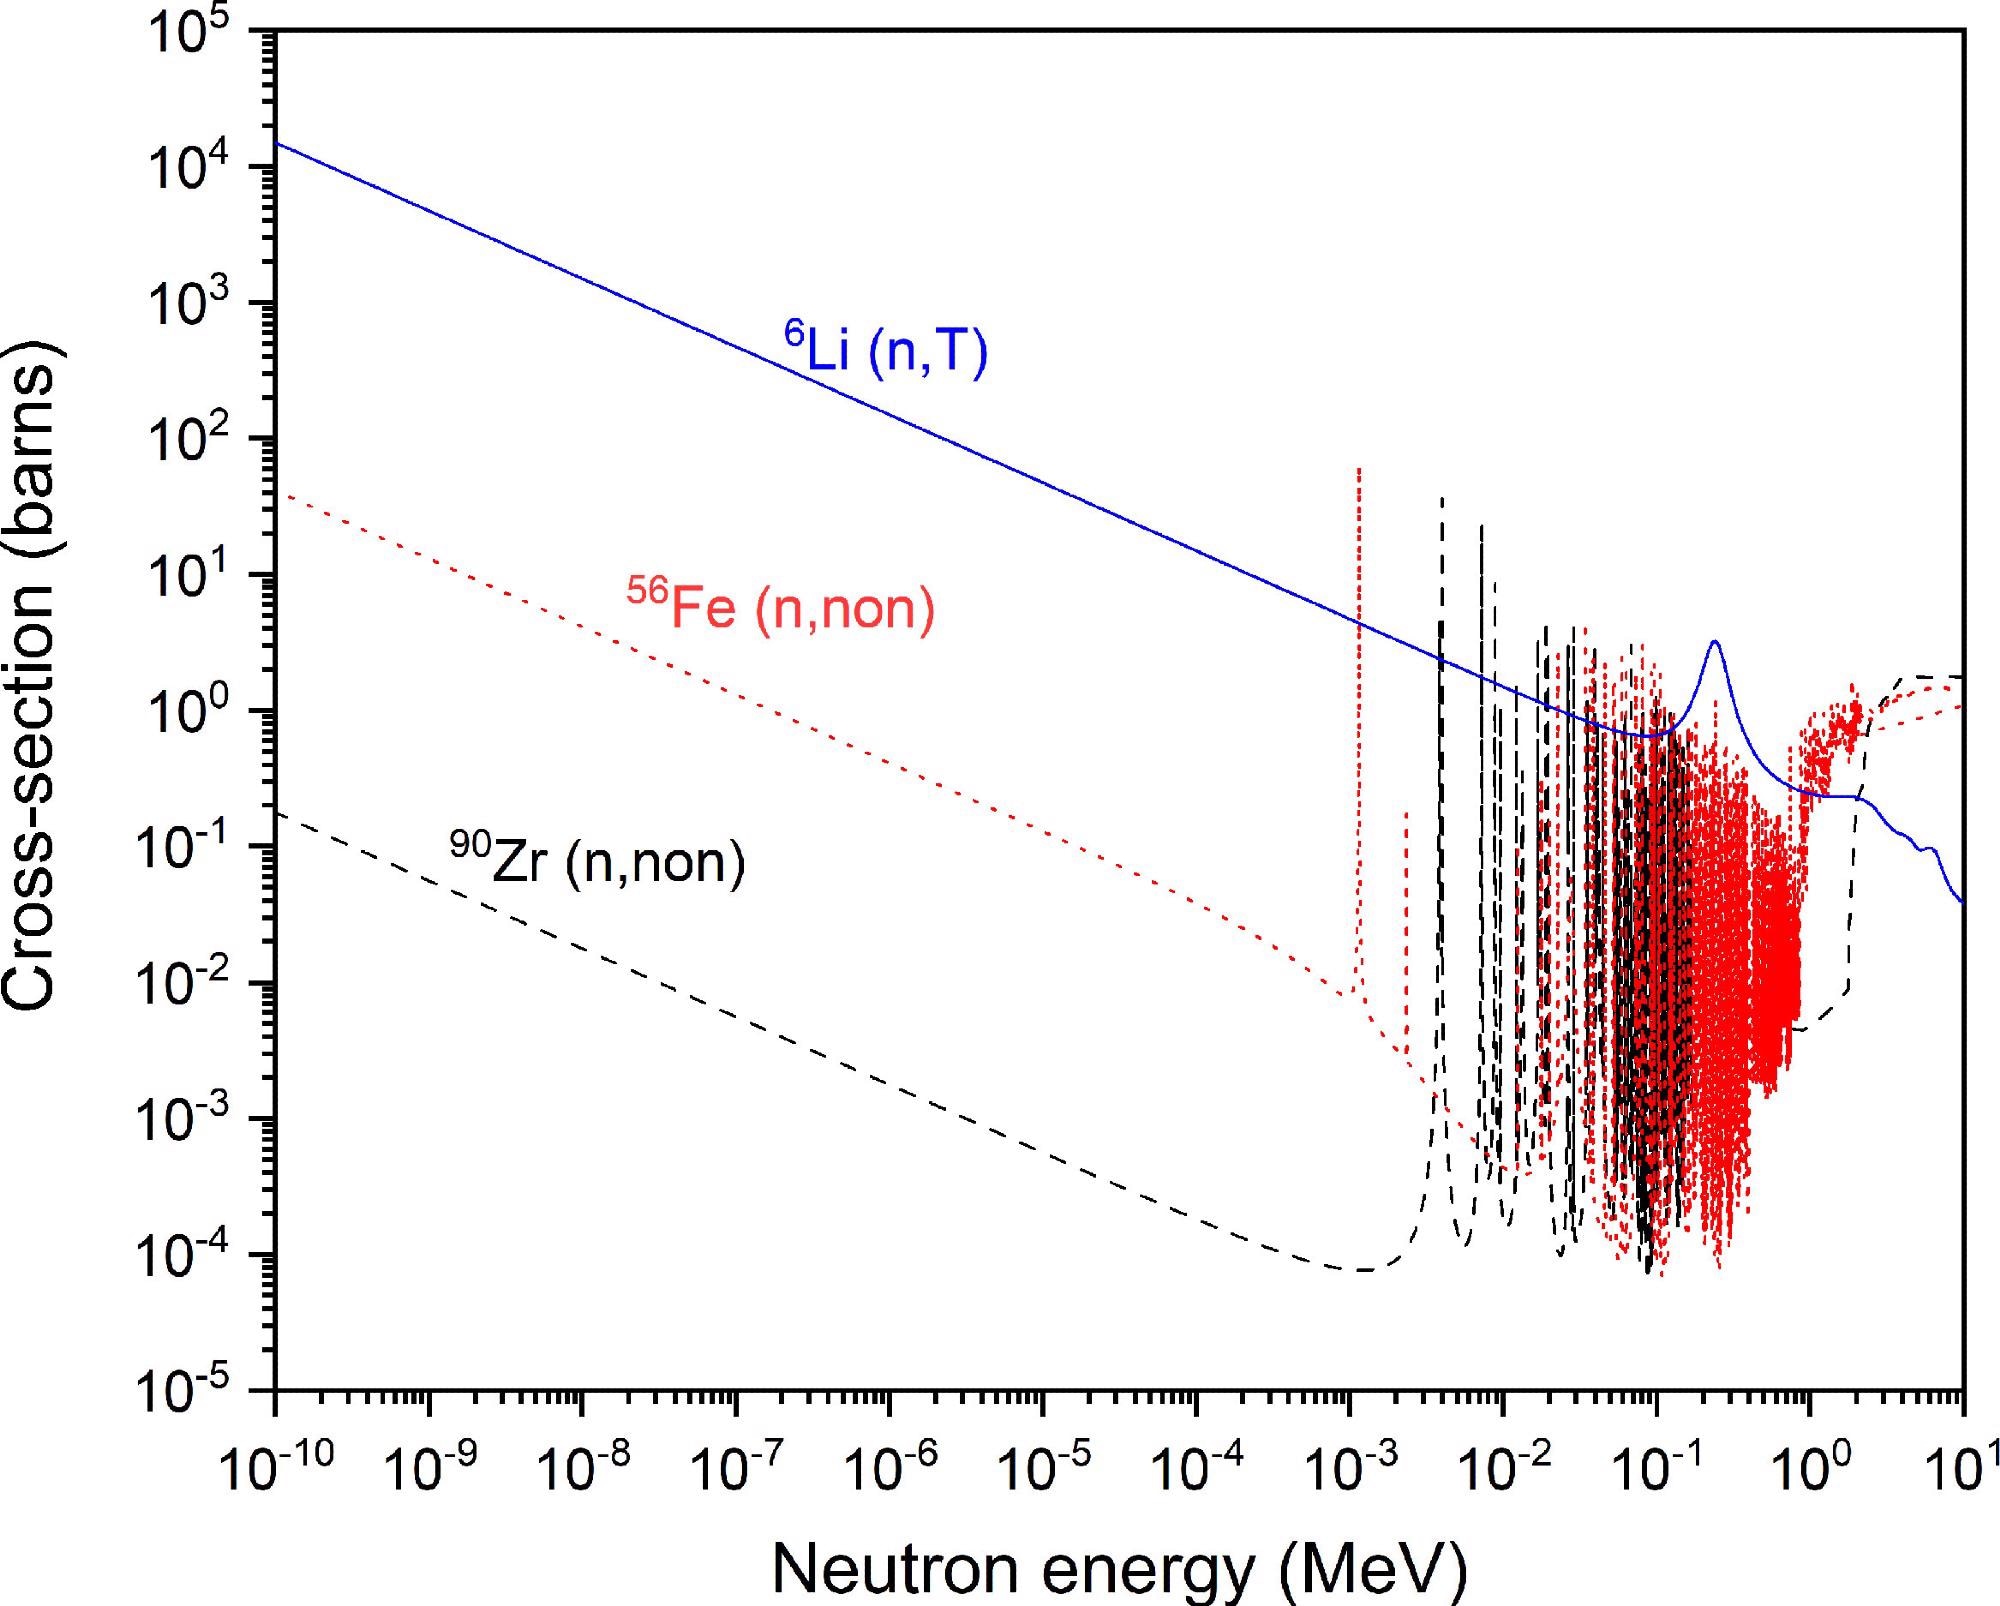 Neutron cross-section for 6Li breeding T (blue solid line), 56Fe non-elastic scattering (red dotted line), 90Zr non-elastic scattering (black dashed line). Data and references used to contruct figure can be found in Ref. [8].